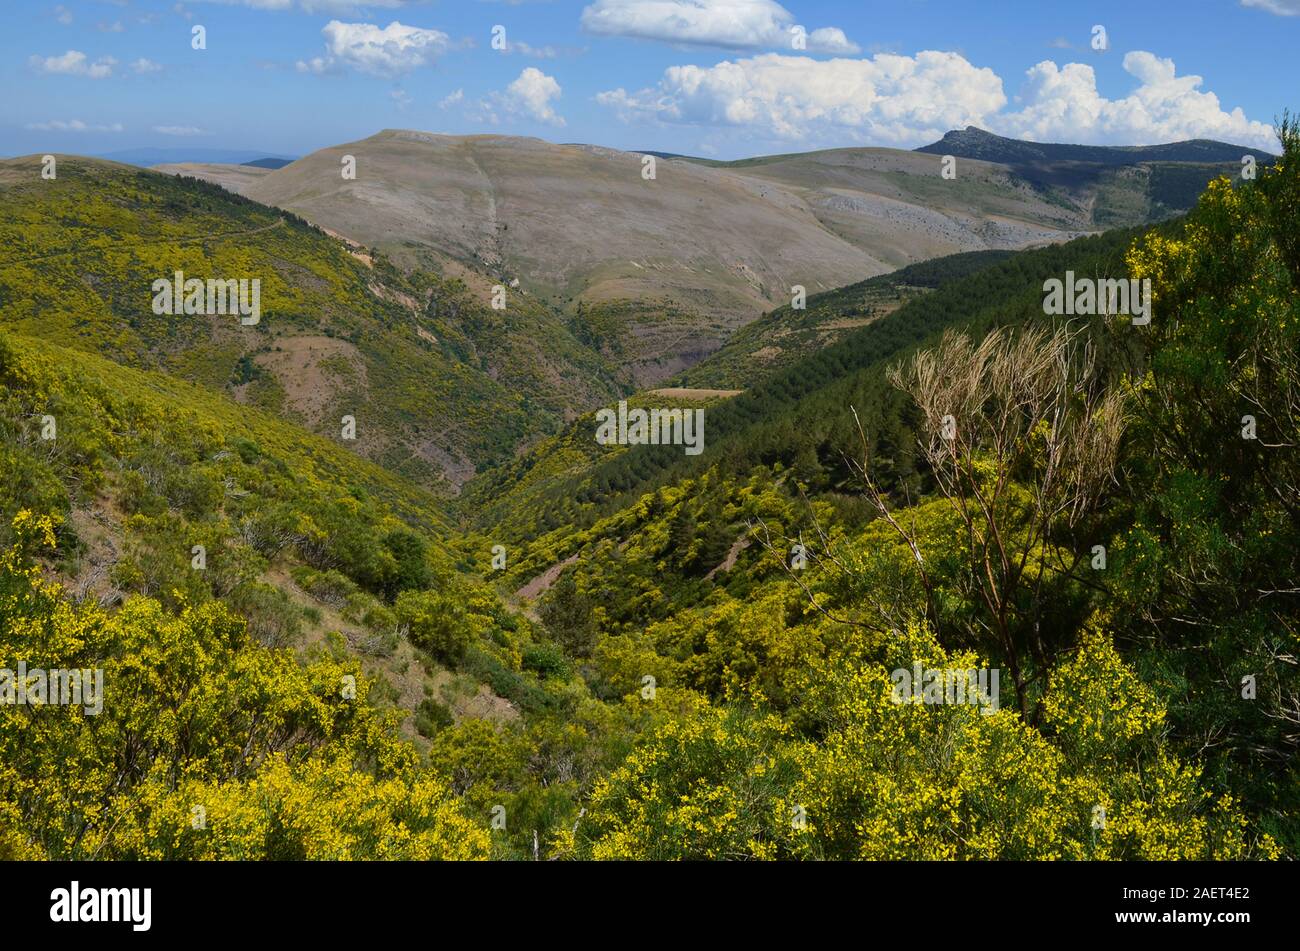 Glacial reliefs and karst landforms at the Urbion mountains in the border between La Rioja and Castile-Leon, Northern Spain Stock Photo